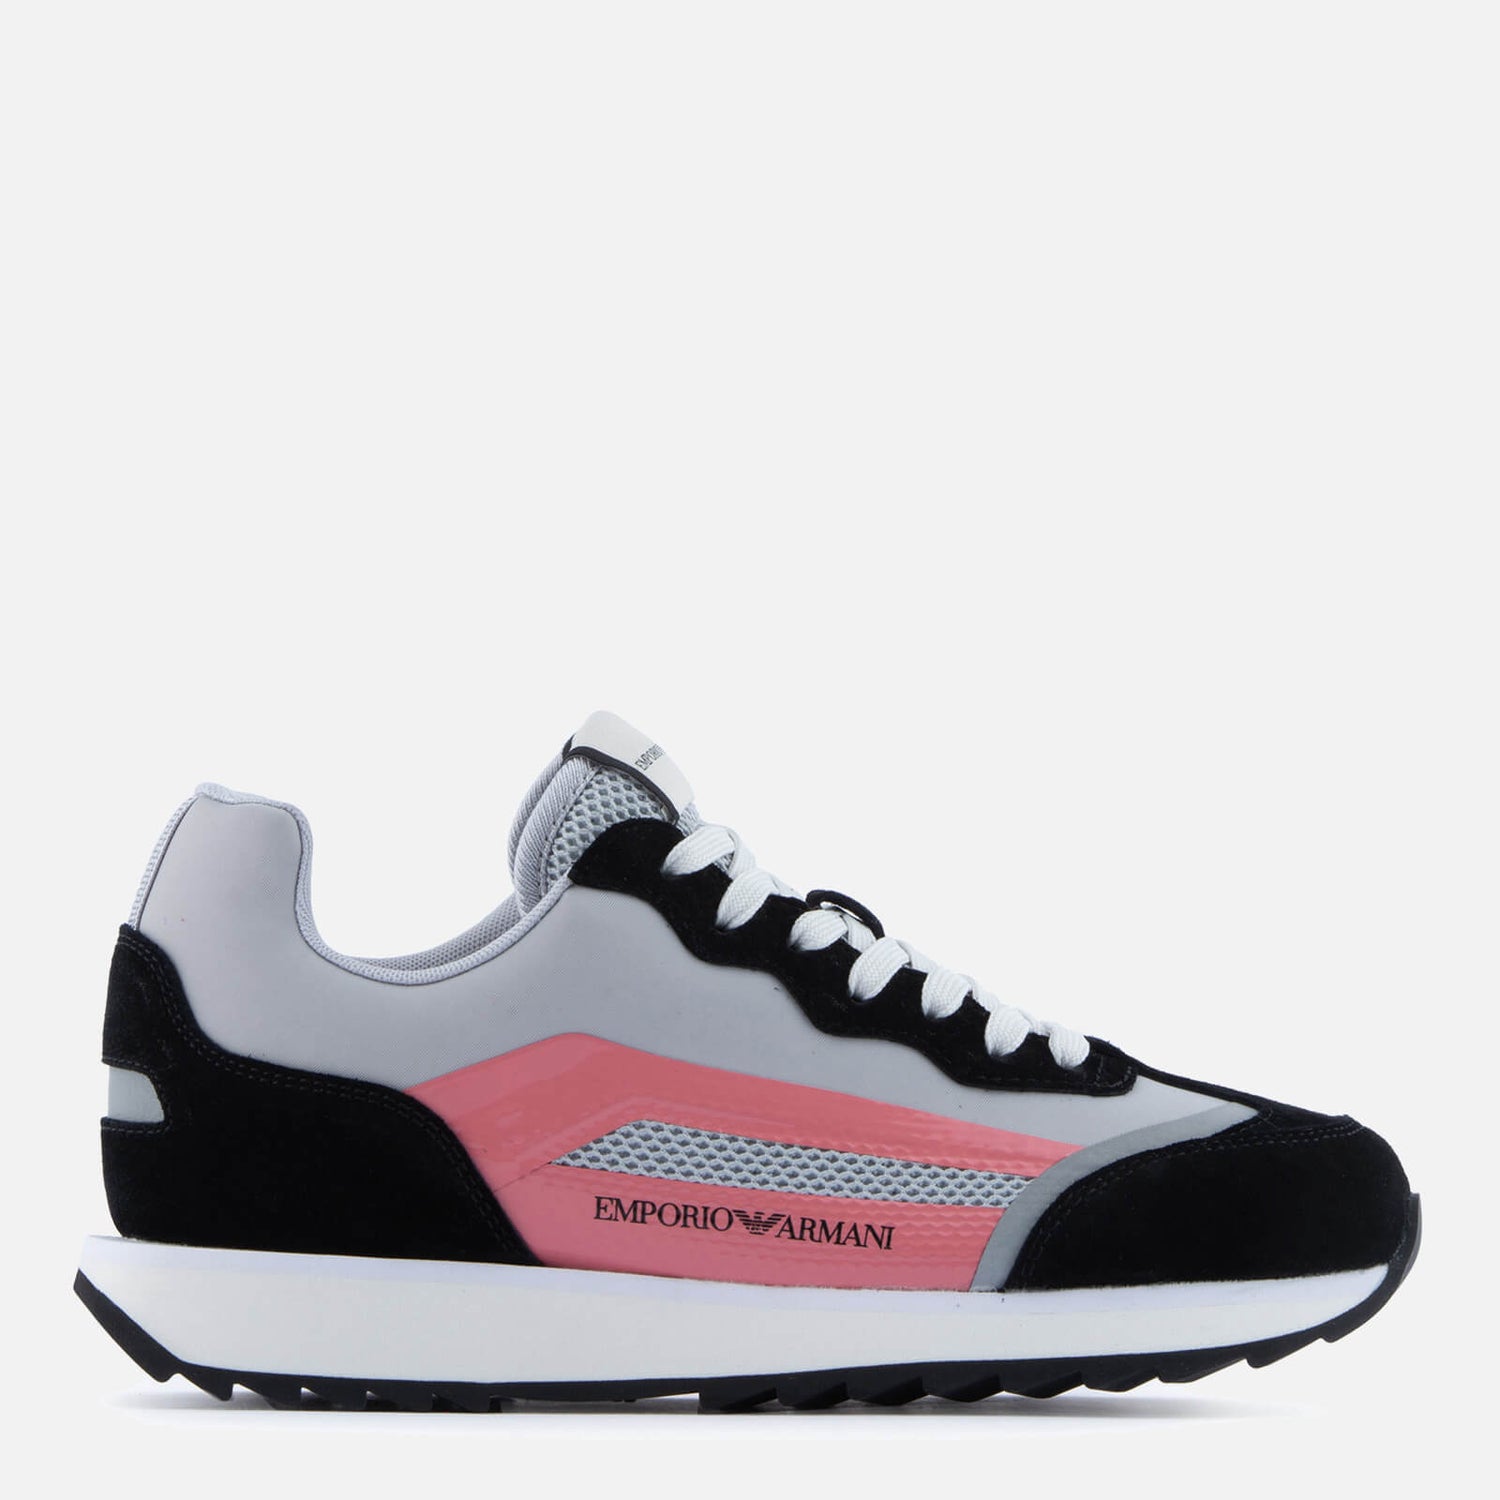 Emporio Armani Women's Abby B Suede Running Style Trainers - Black/Pearl - UK 5